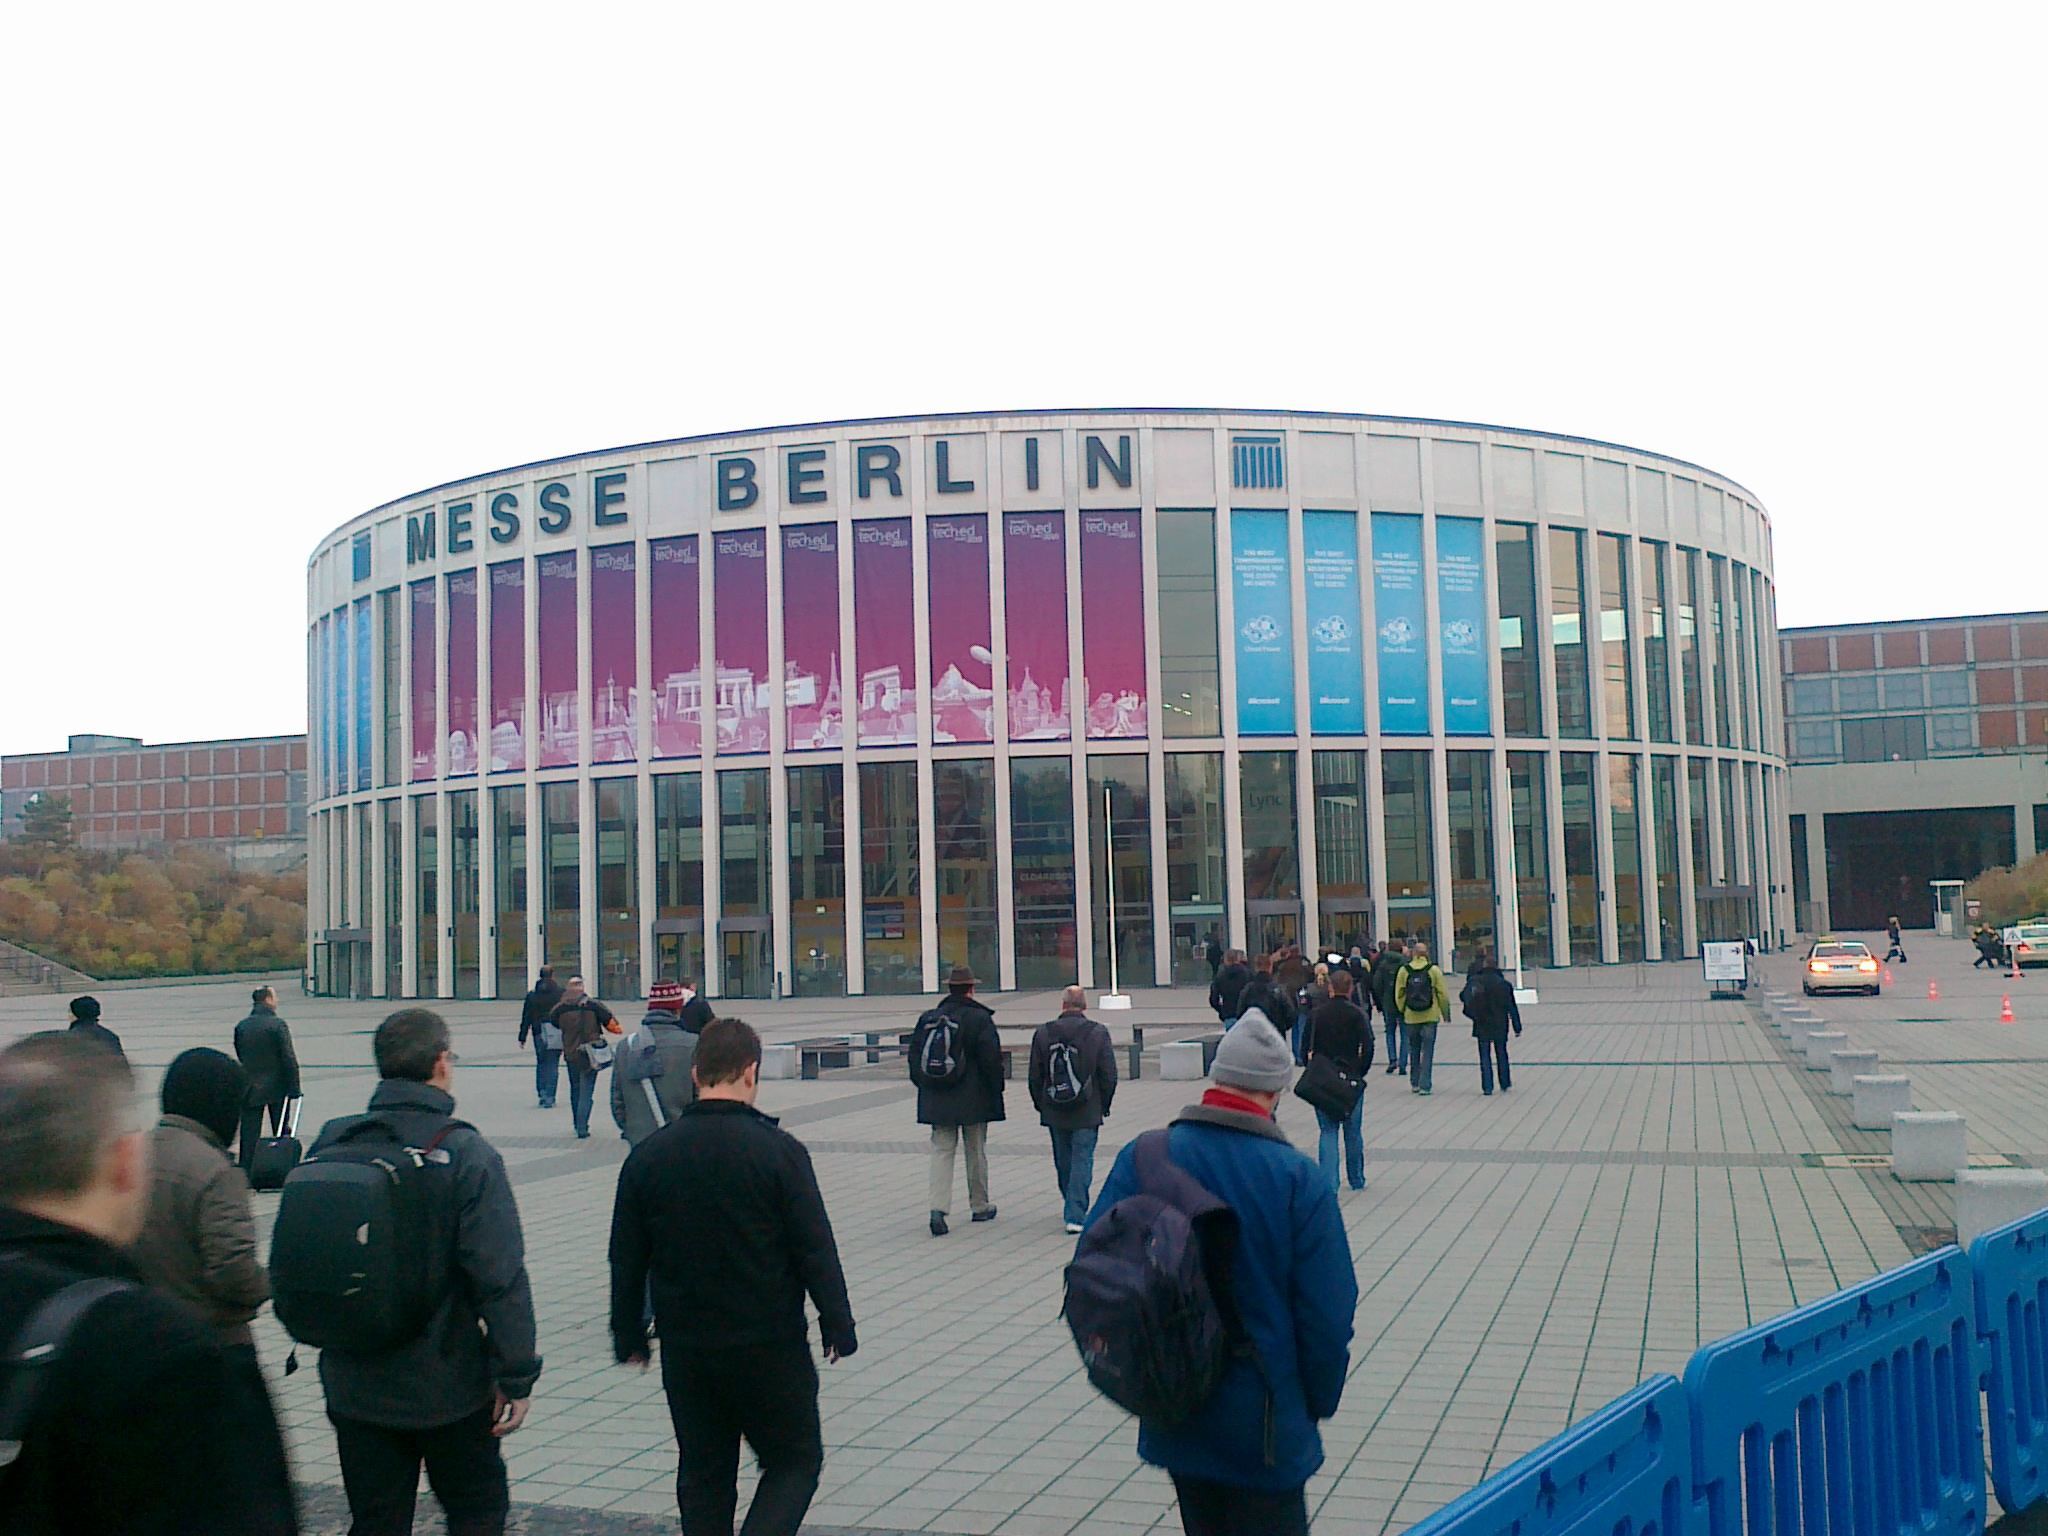 TechEd Messe Berlin Entrance